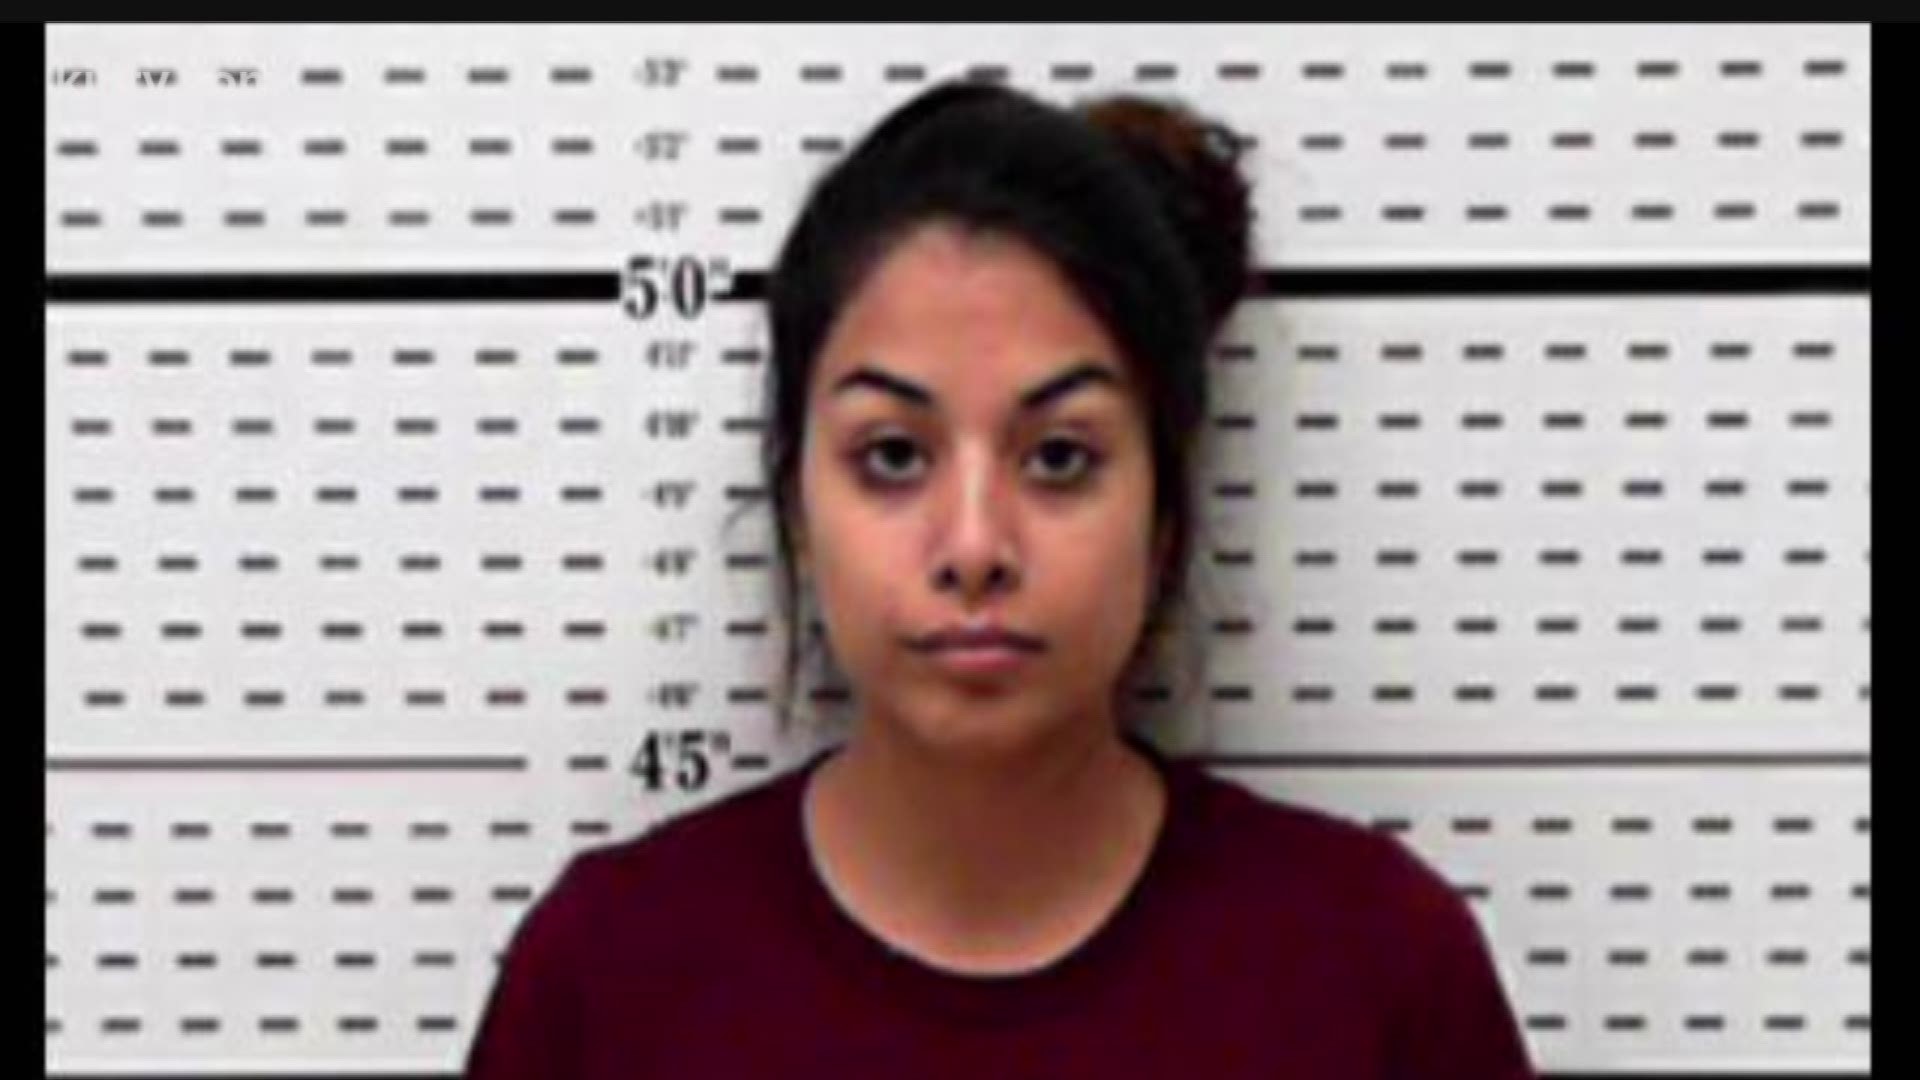 The Jim Wells County Sheriff's Office made an arrest in Alice involving a woman in possession of illegal drugs while holding a child.